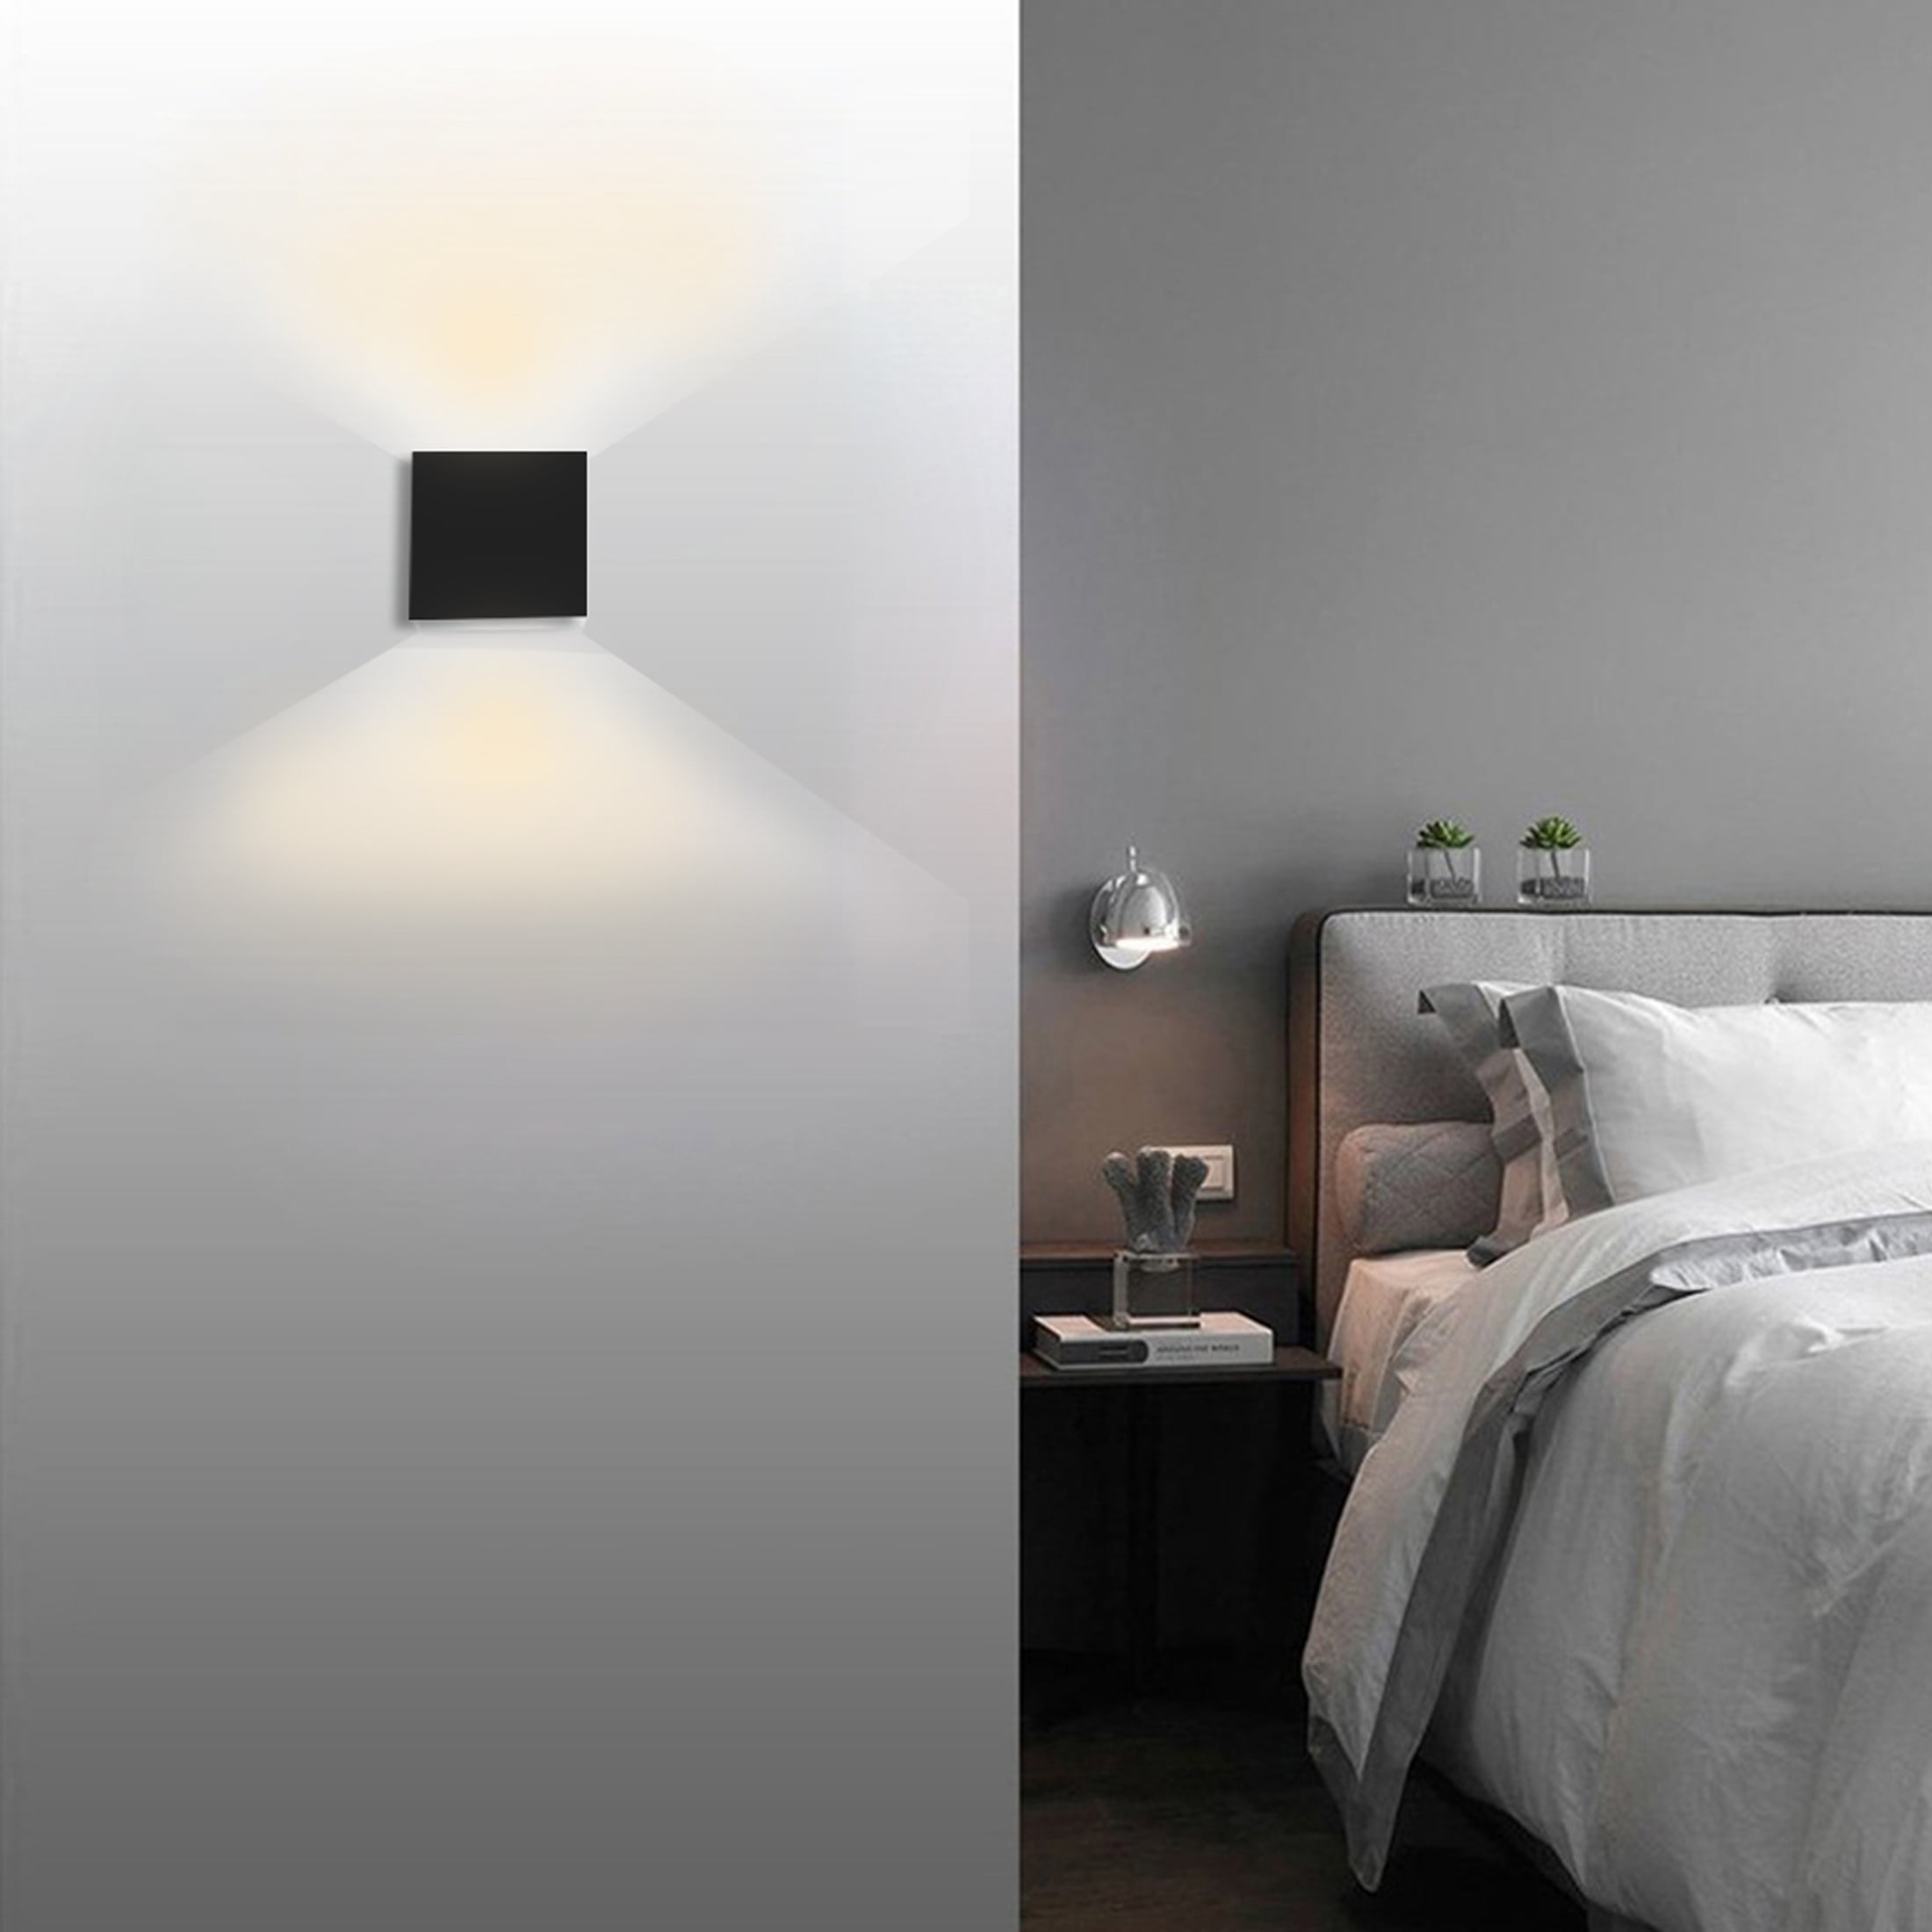 Modern Round LED Wall Light Fixture Sconce Lamp Hotel Family Indoor Bed Bedside 